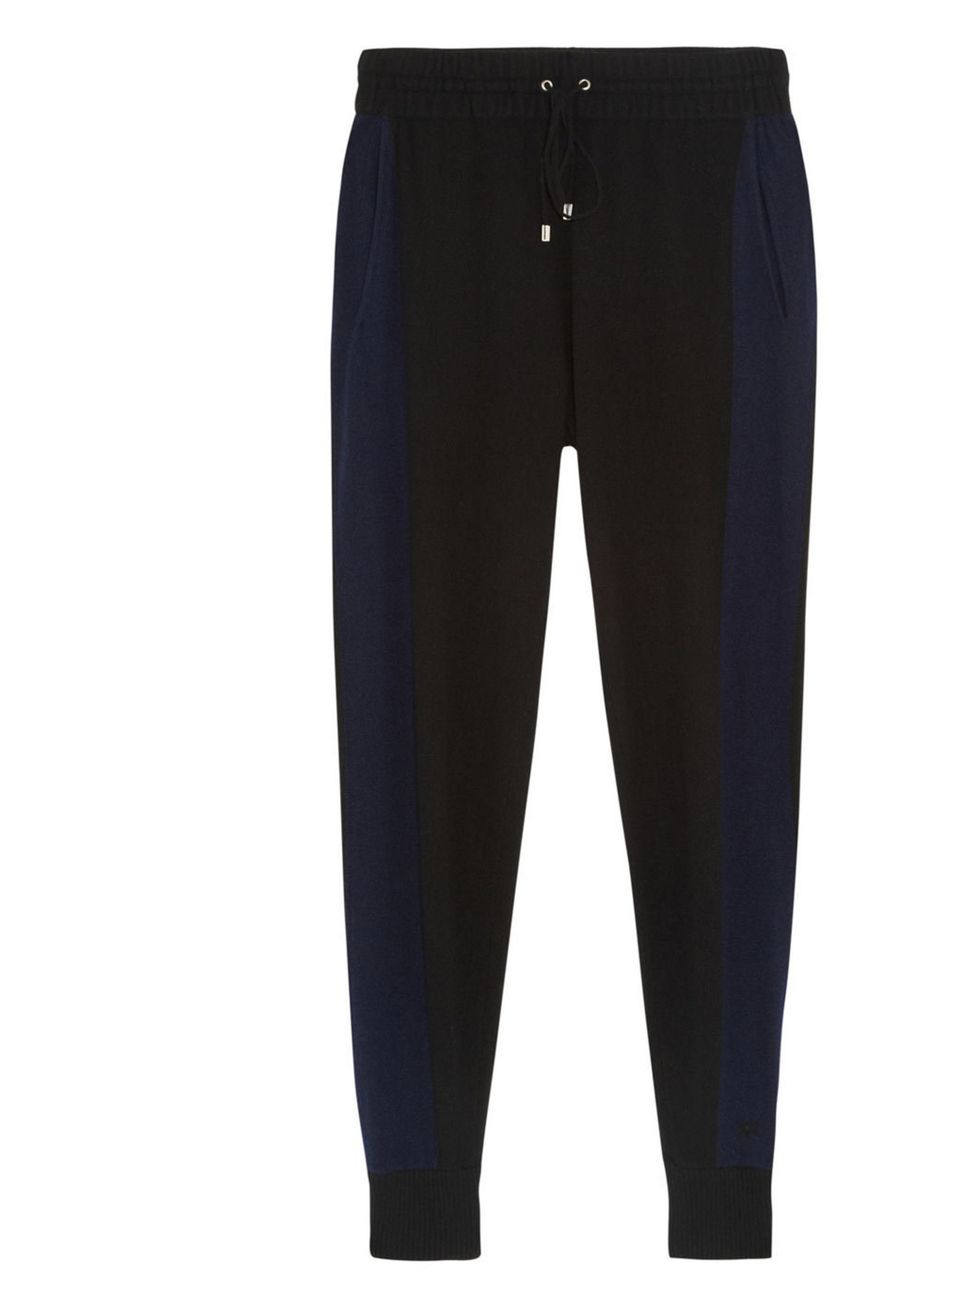 <p>Panel Beach cashmere track pants, £275, by Banjo &amp; Matilda, available at <a href="http://www.net-a-porter.com/product/385298">net-a-porter.com</a></p>